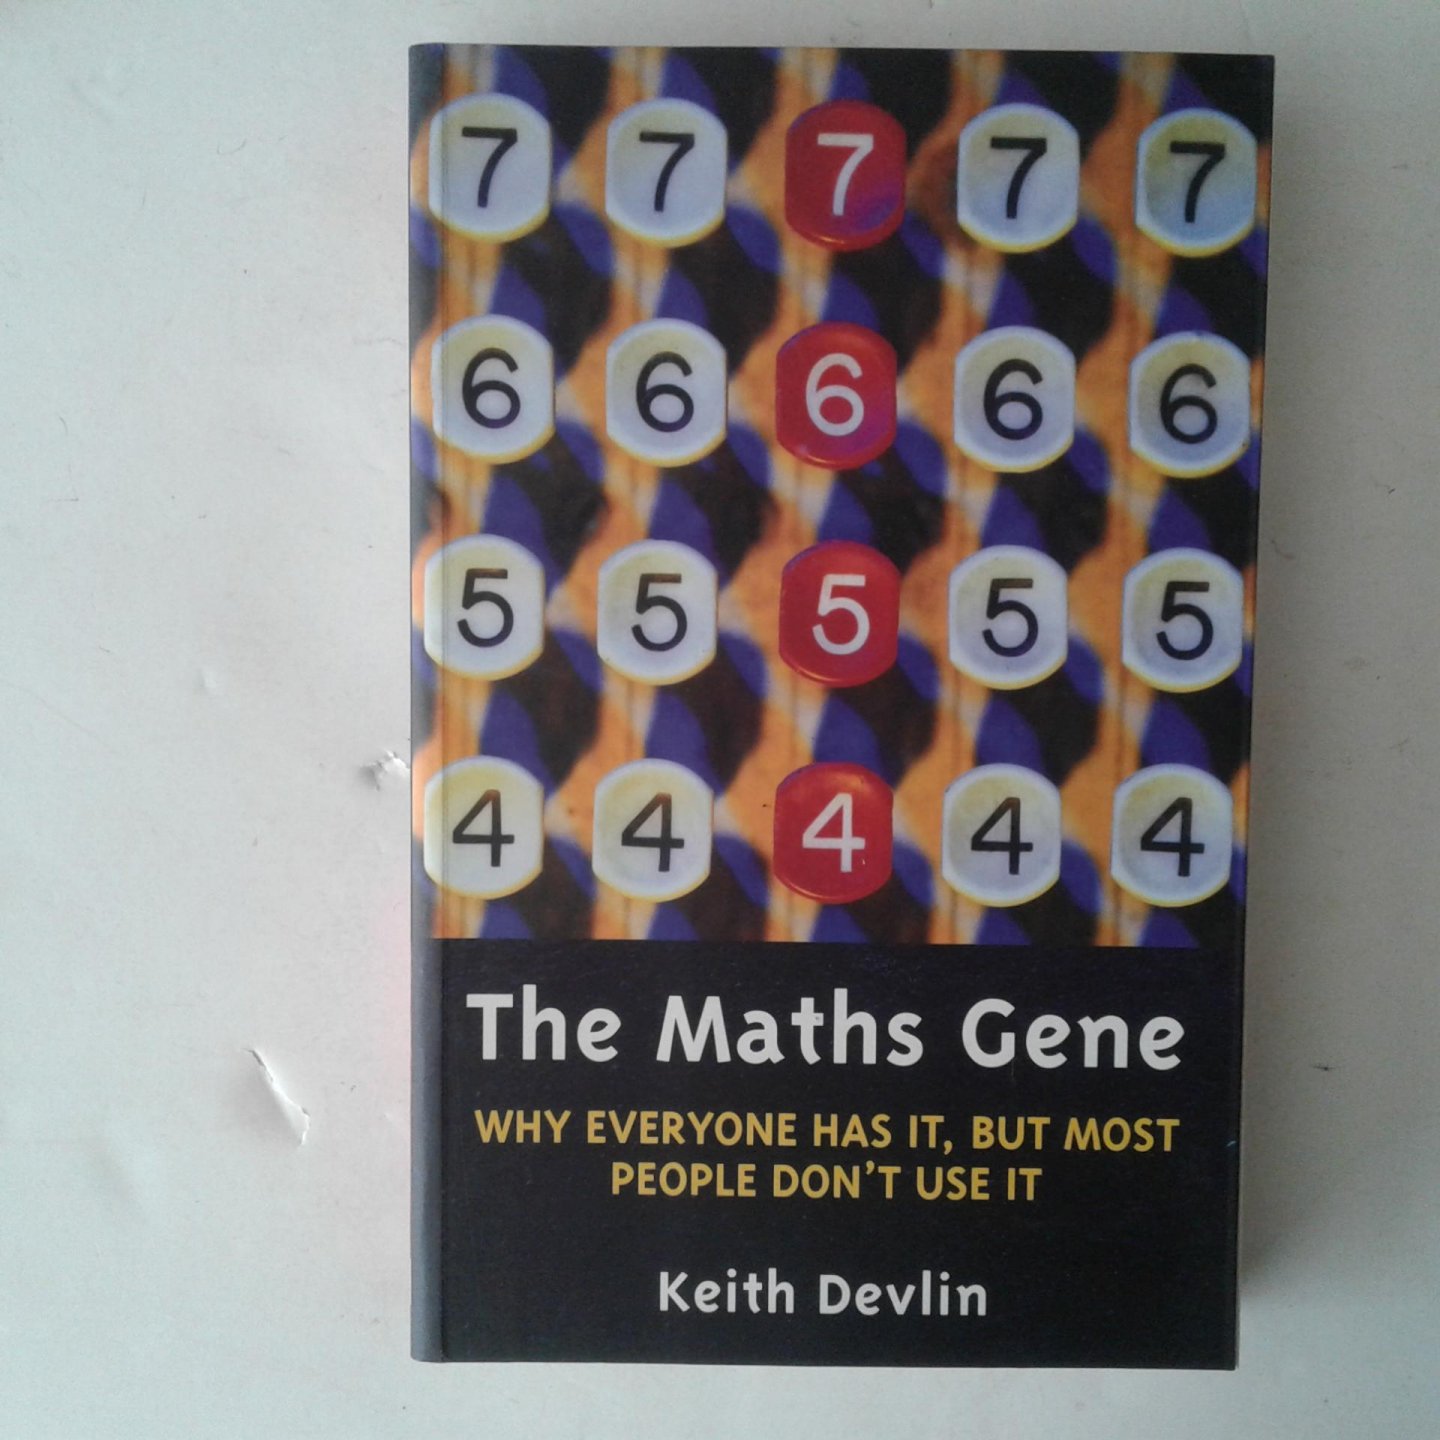 Devlin, Keith - The Maths Gene ; Why Everyone Has it, but kost People don't Use it